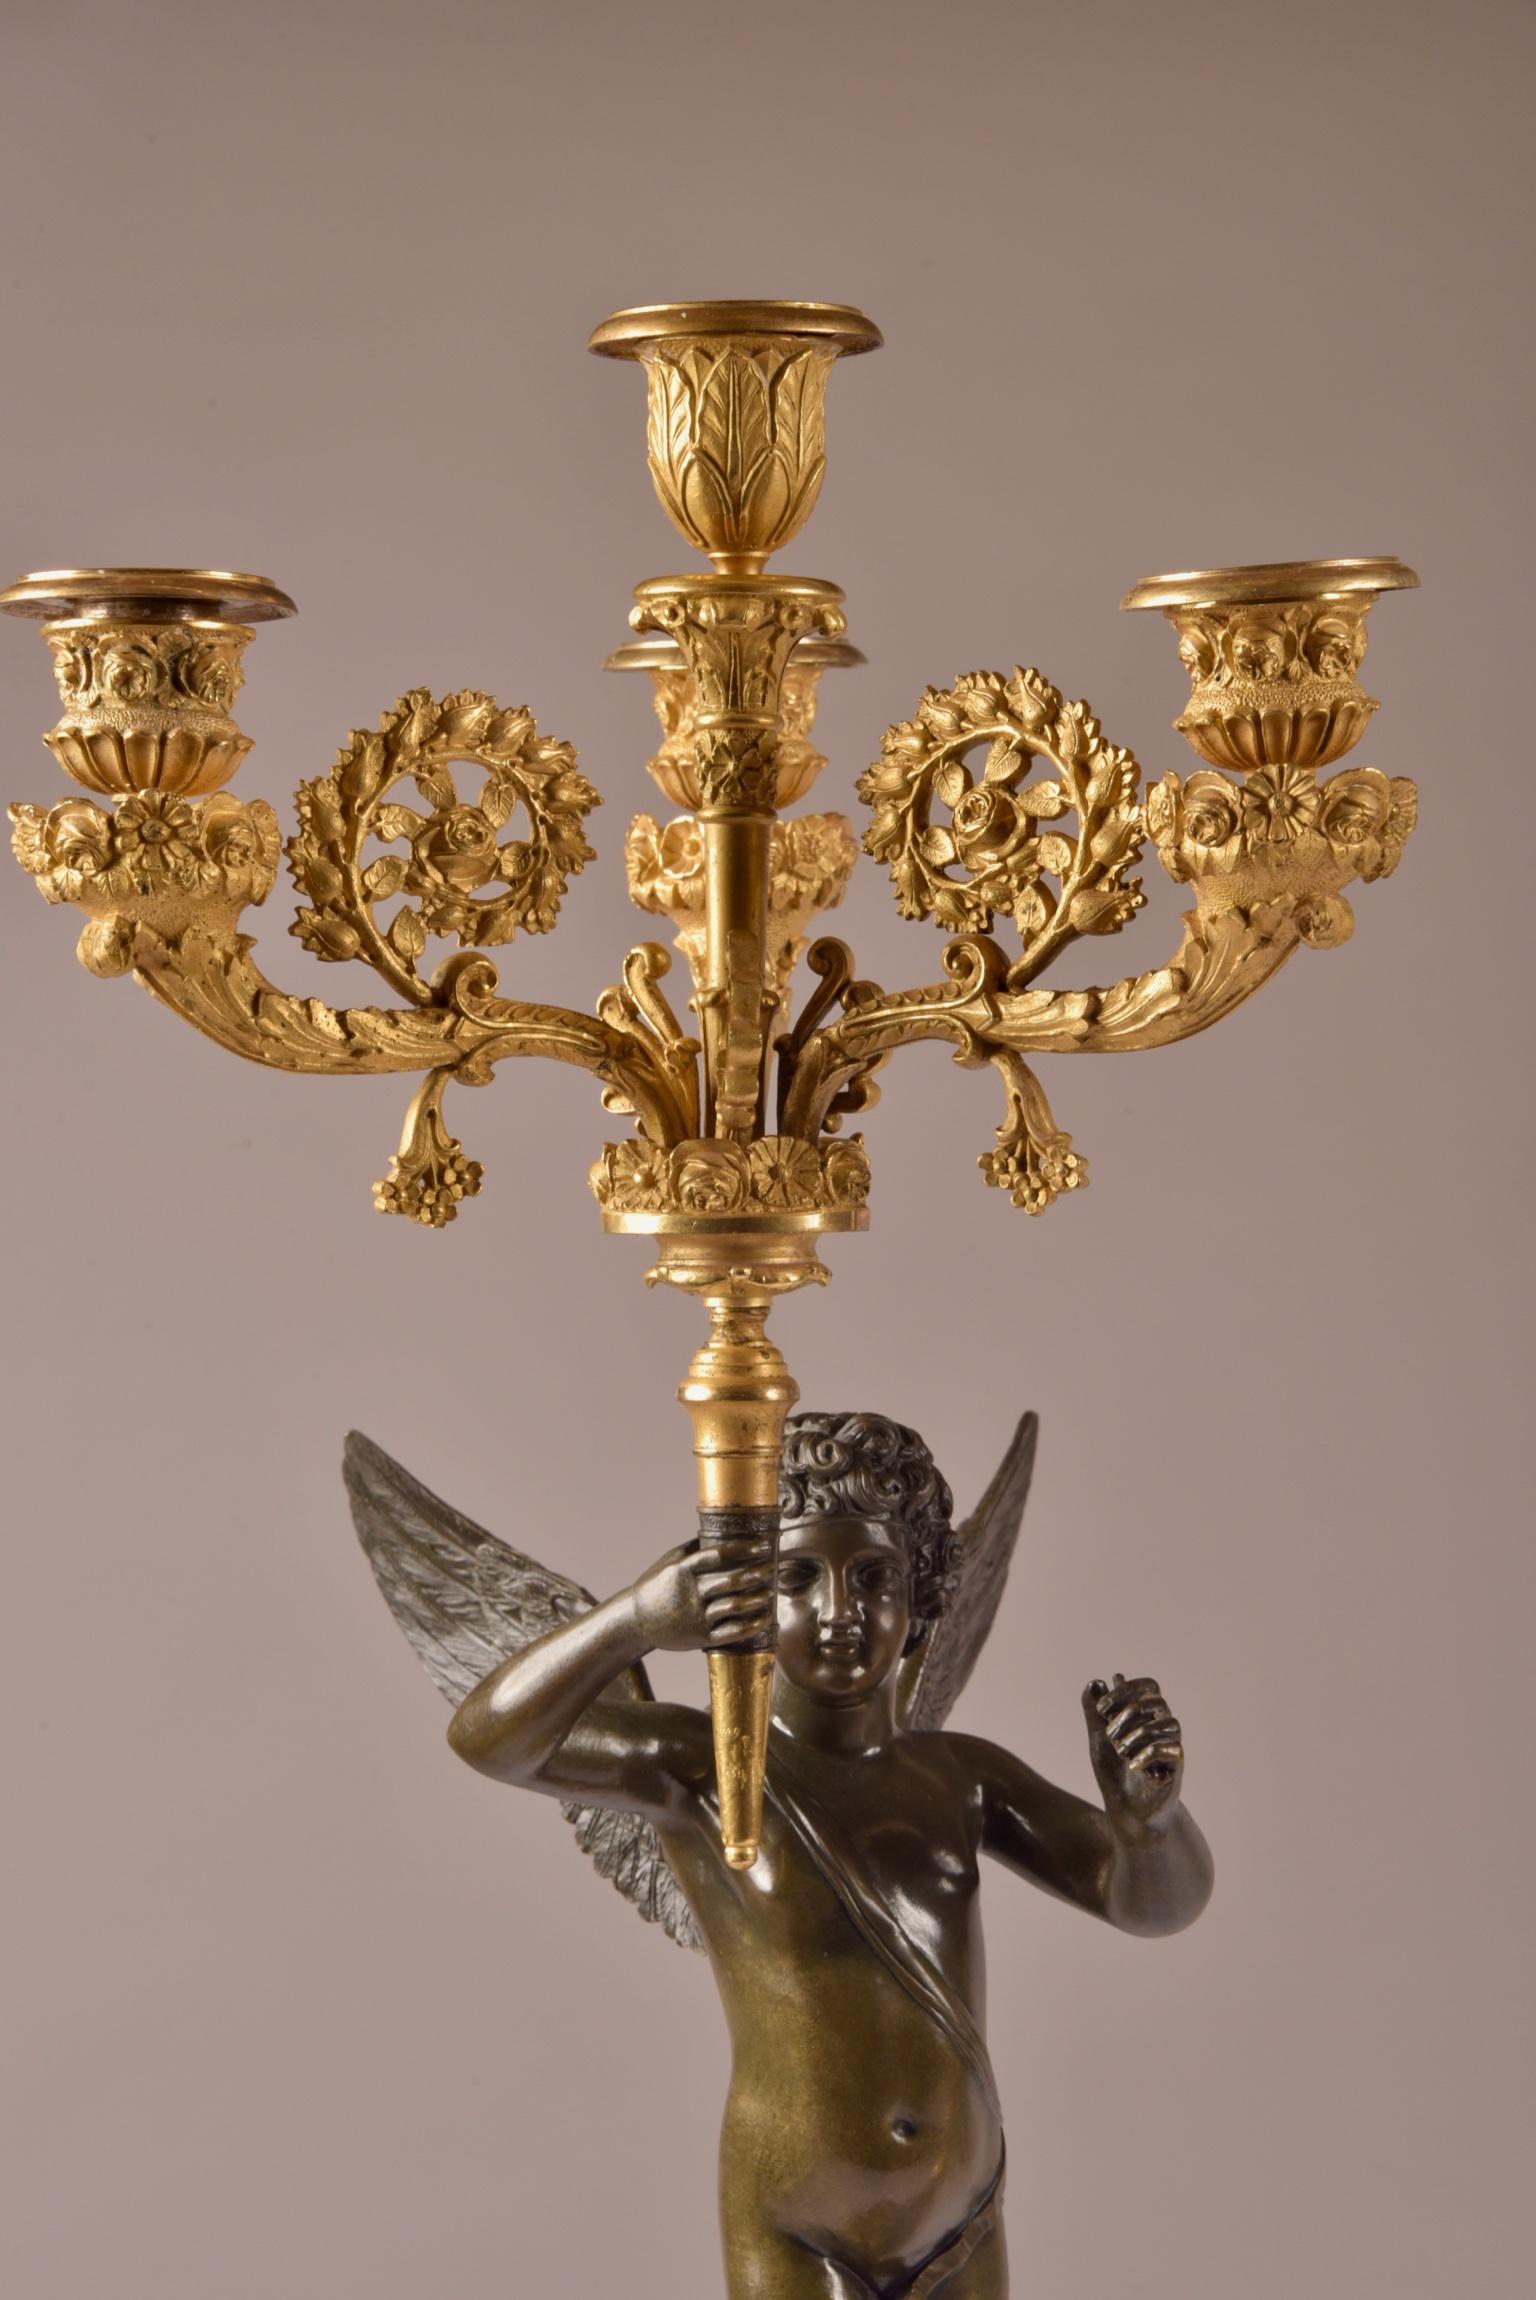 Pair of French Empire Candelabras with Putti, Superb Ormolu Candleholders, 1810  In Good Condition For Sale In Ulestraten, Limburg